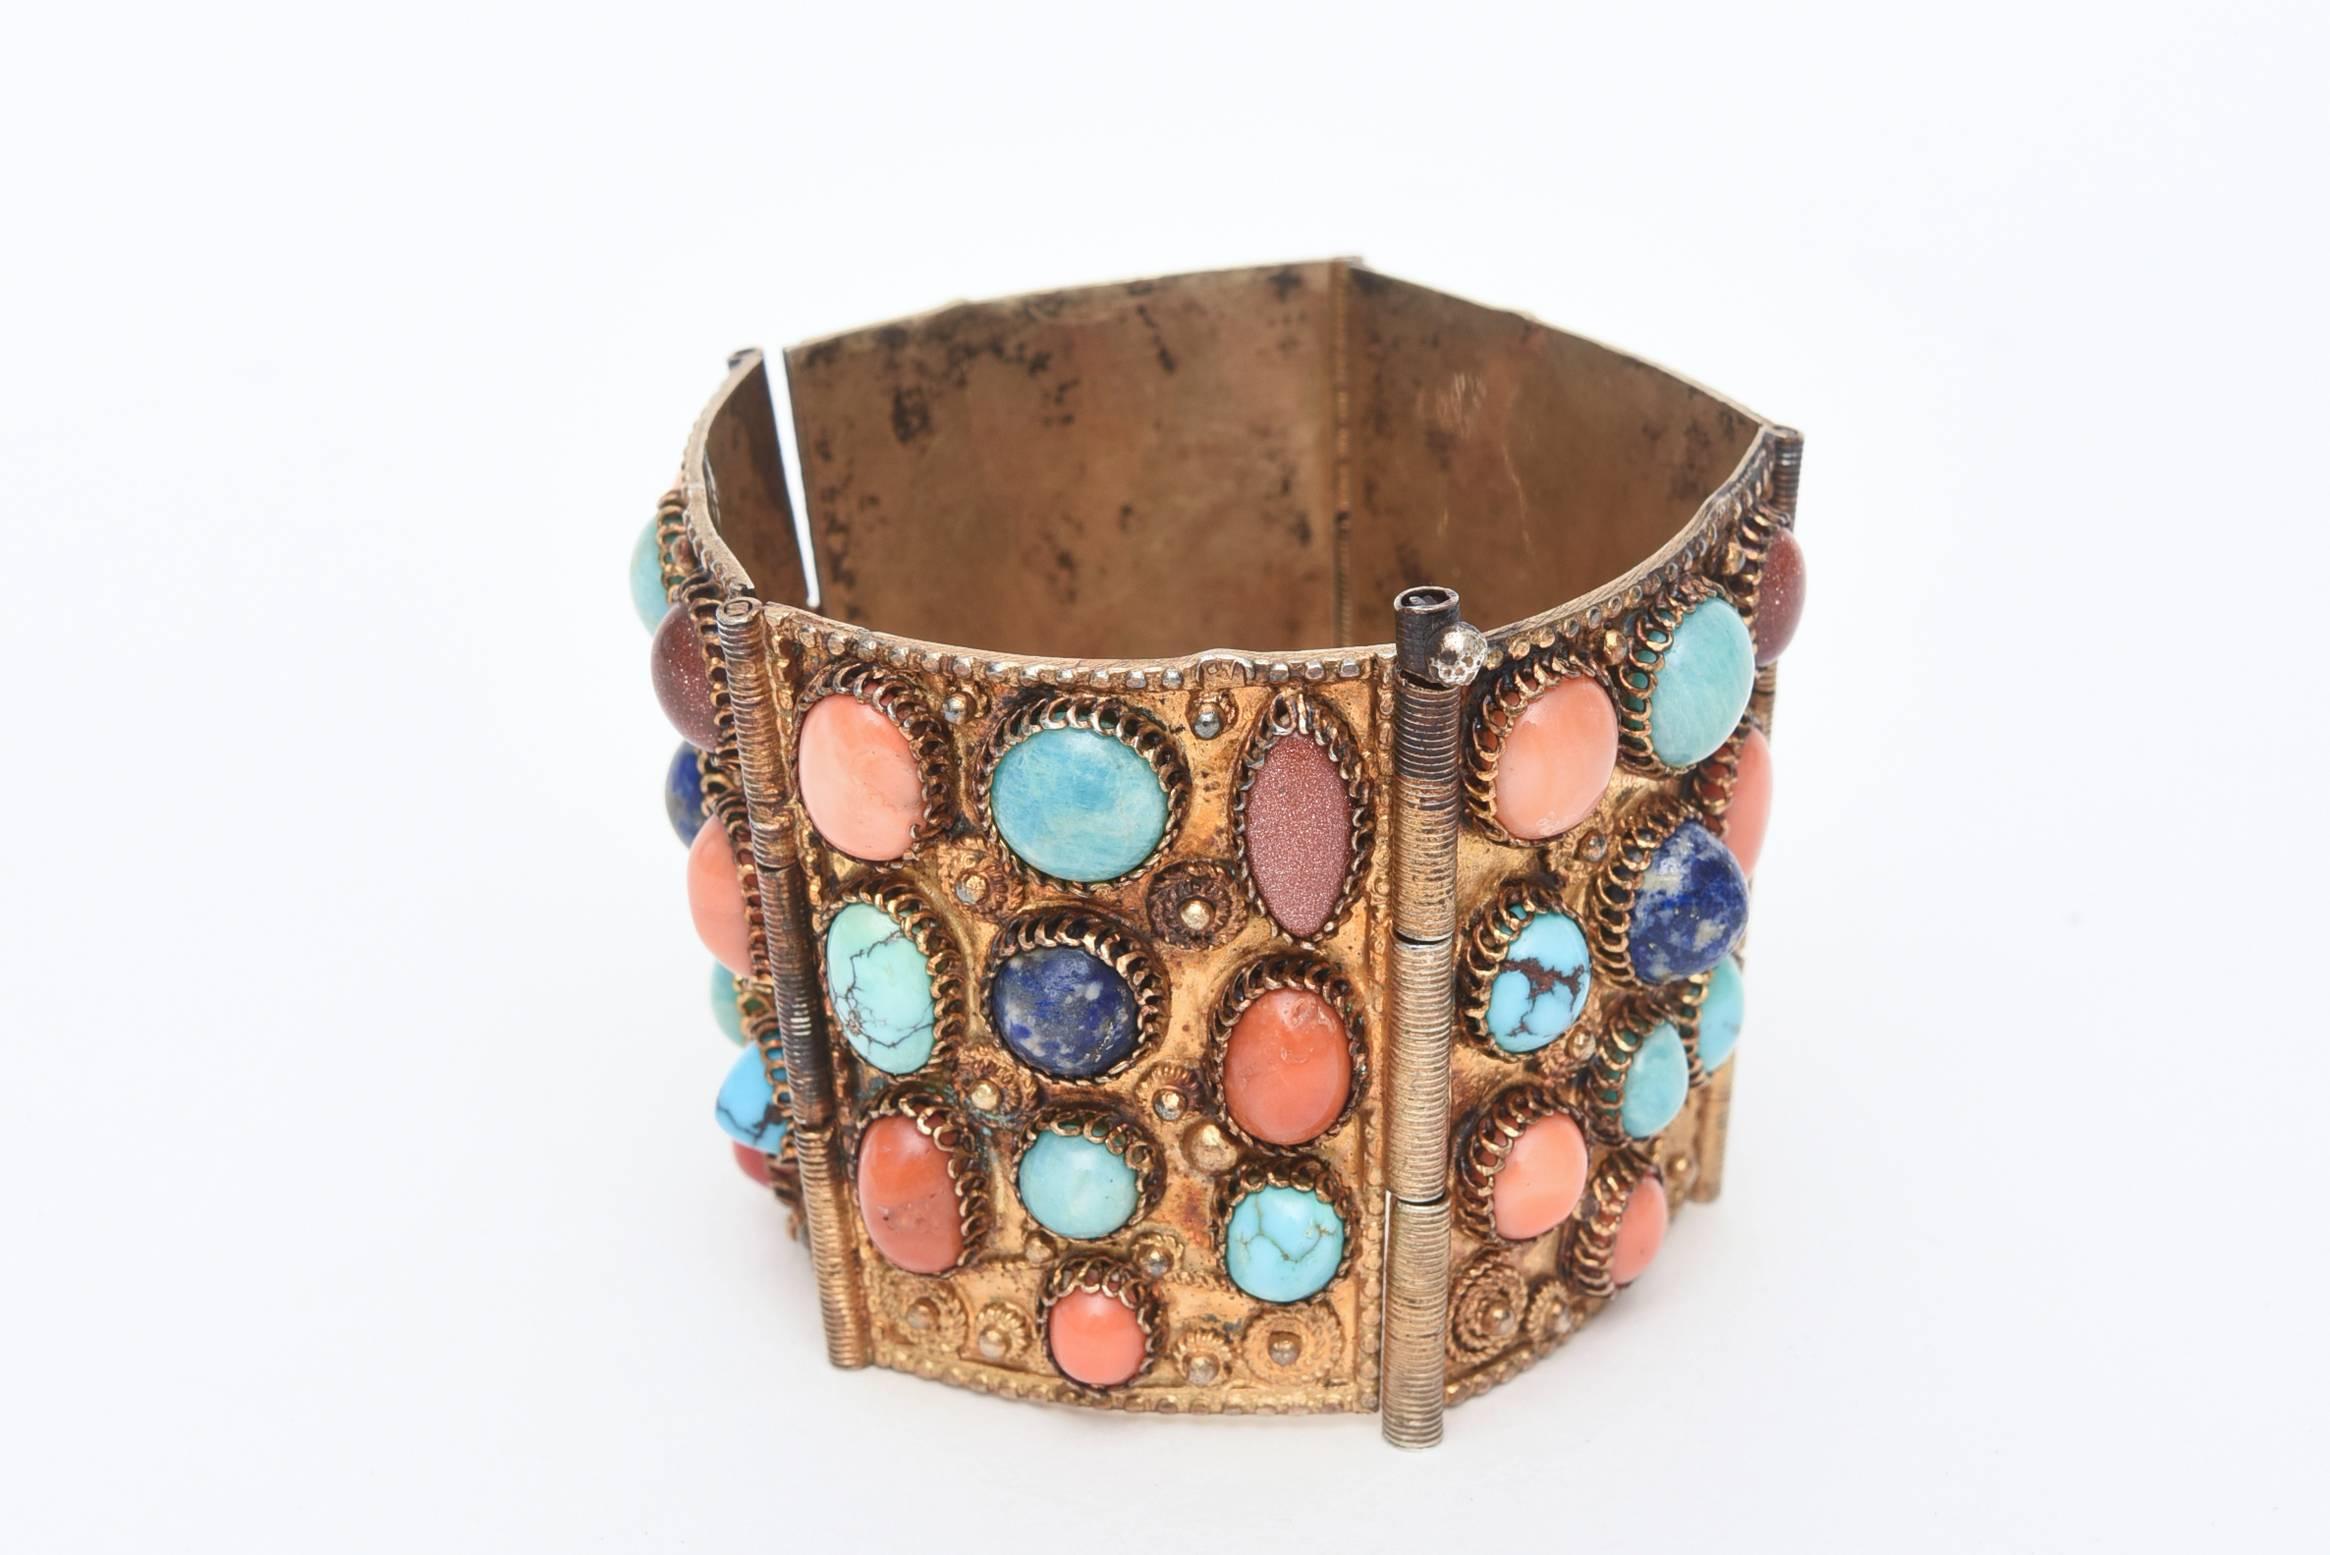  Egyptian Revival Coral, Turquoise and Lapis Vermeil Cuff Bracelet  4